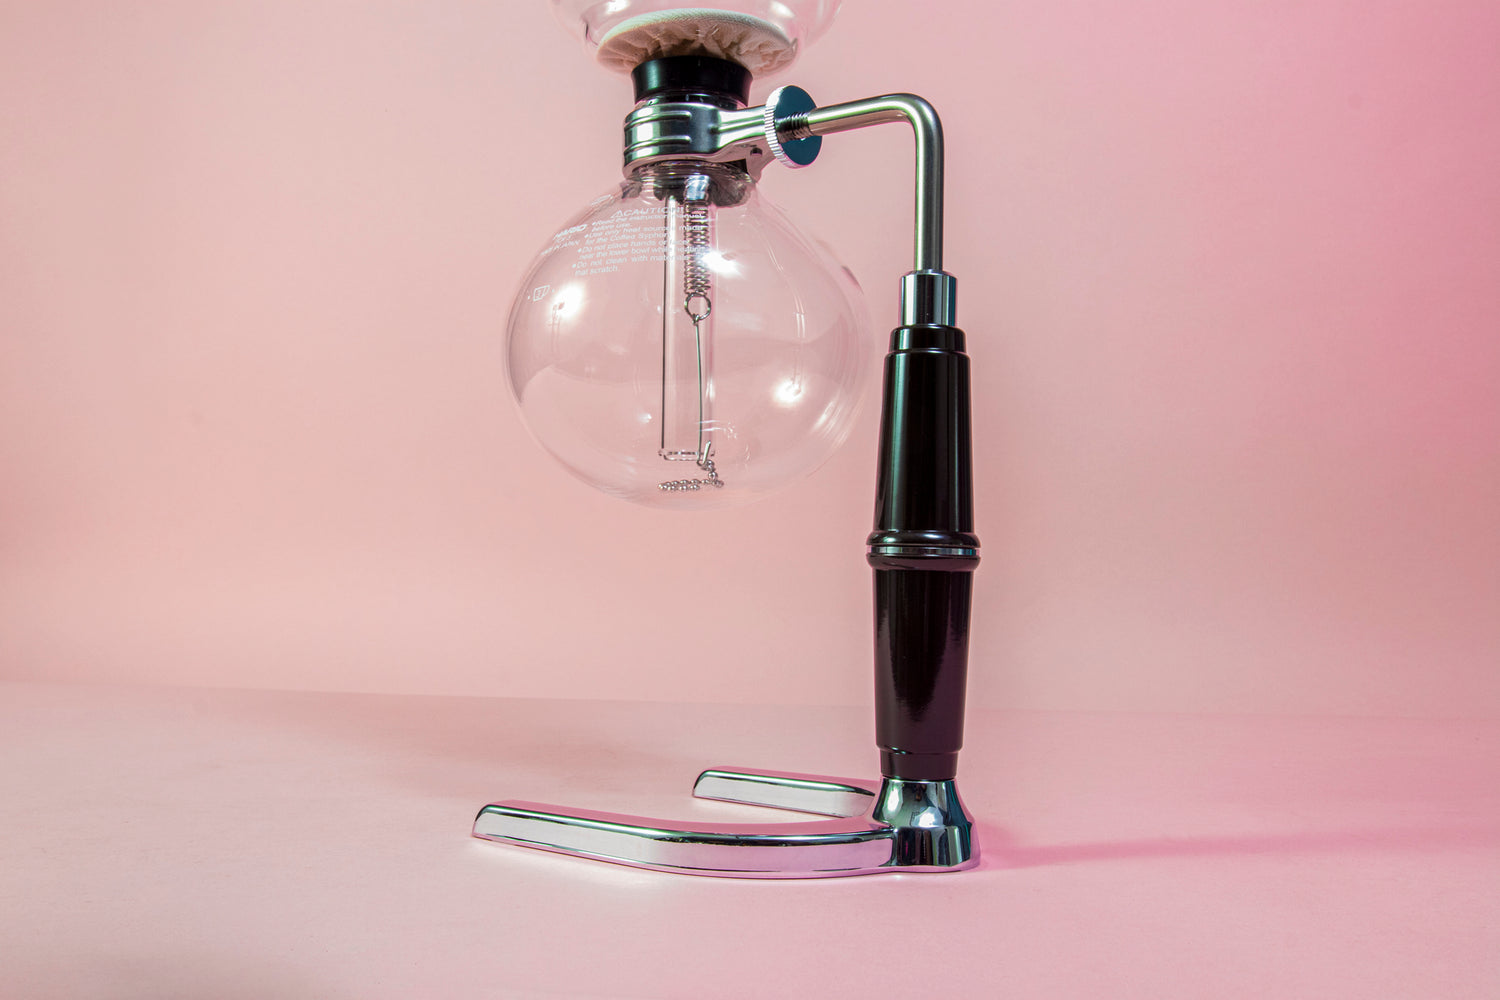 Close up of a two piece glass coffee syphon above an alcohol burner attached to a metal and plastic arm with a chrome base on a pink backdrop.